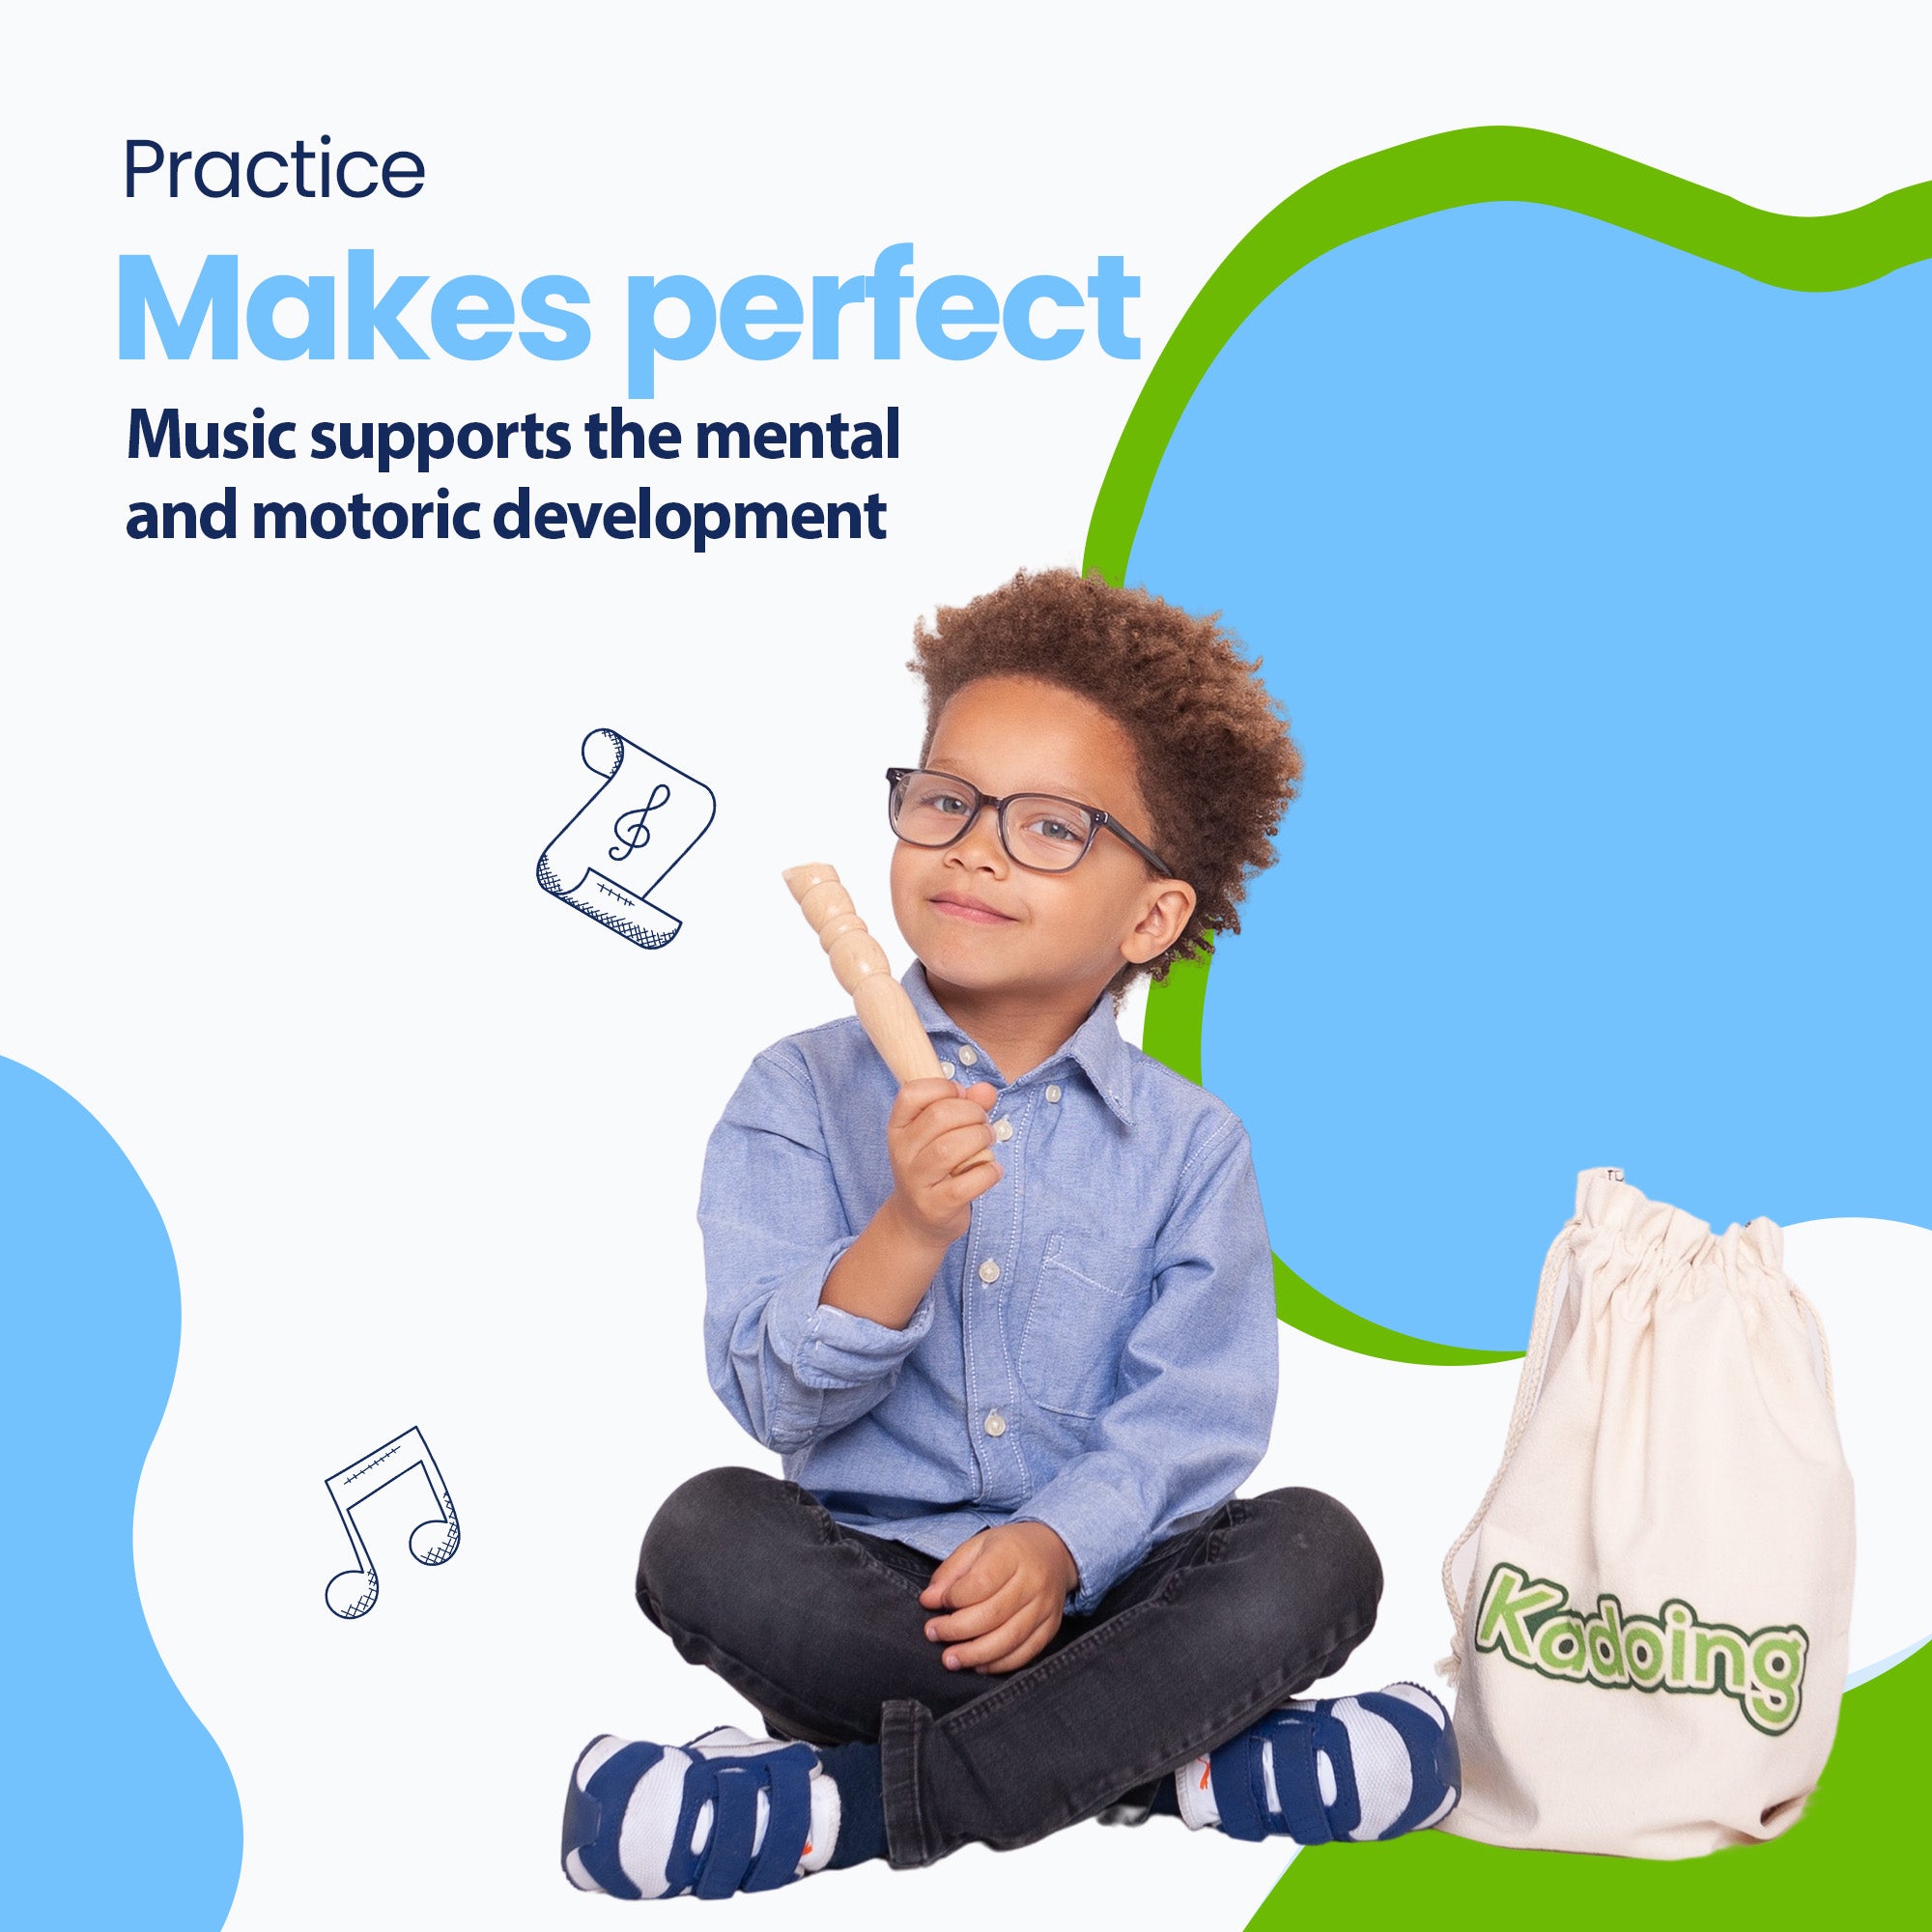 Everyone knows, practice makes perfect. Therefore, start developing your child's musical talent early. Good for motor and mental development